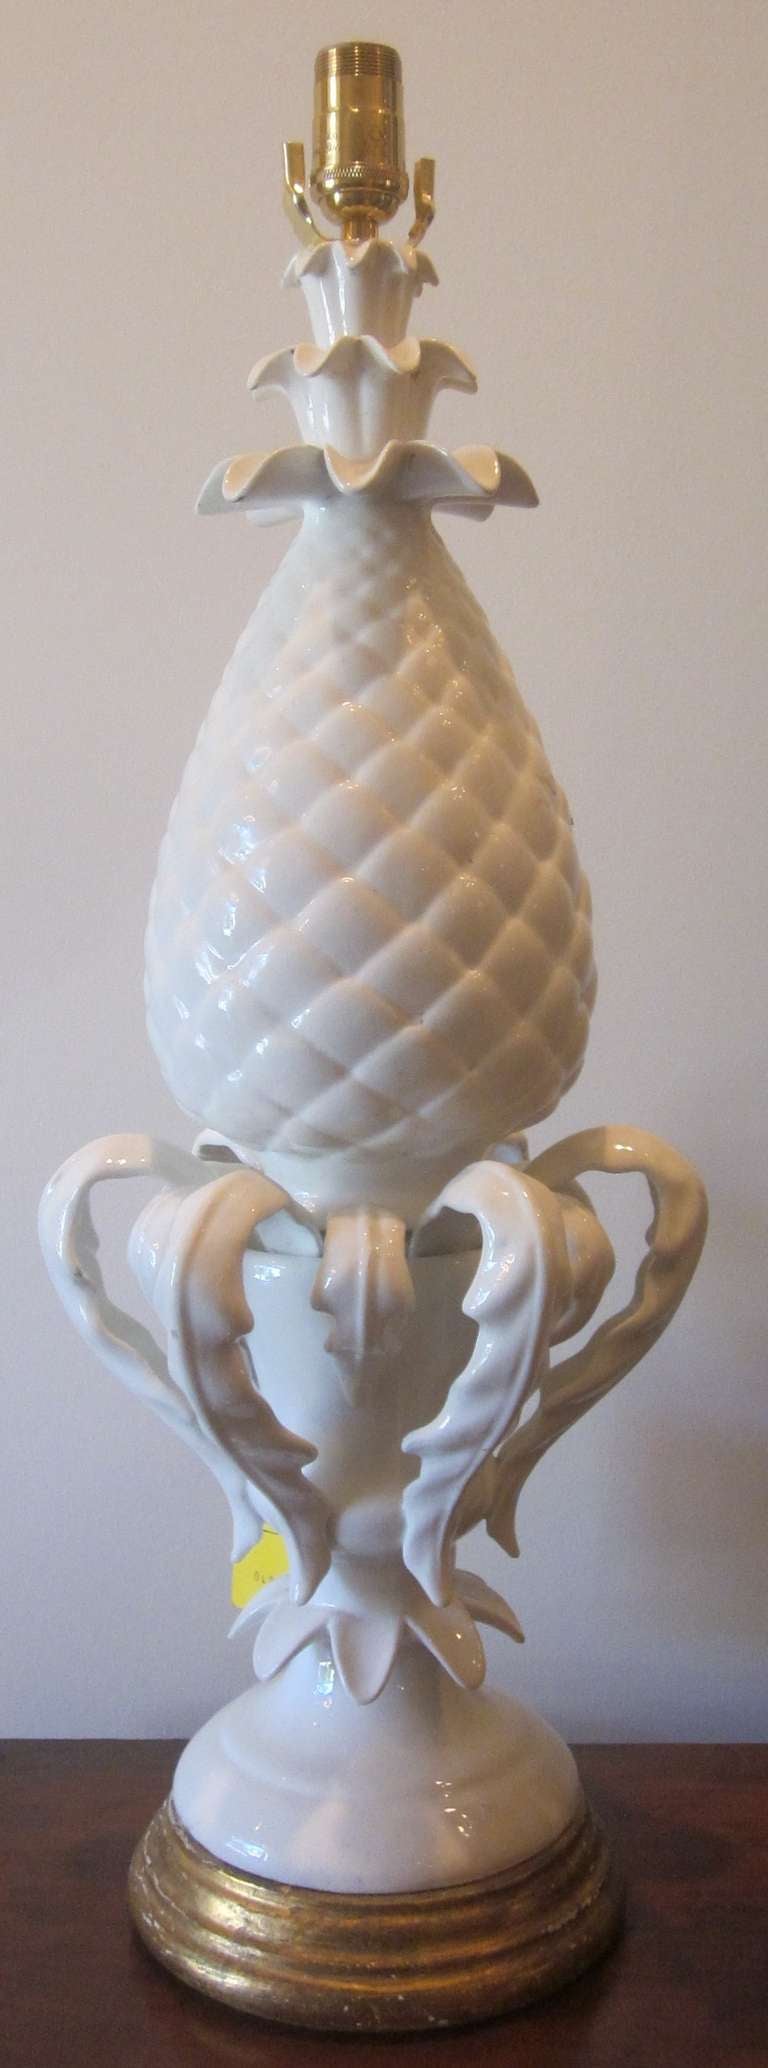 A Spanish white glazed pineapple table lamp with a giltwood base.